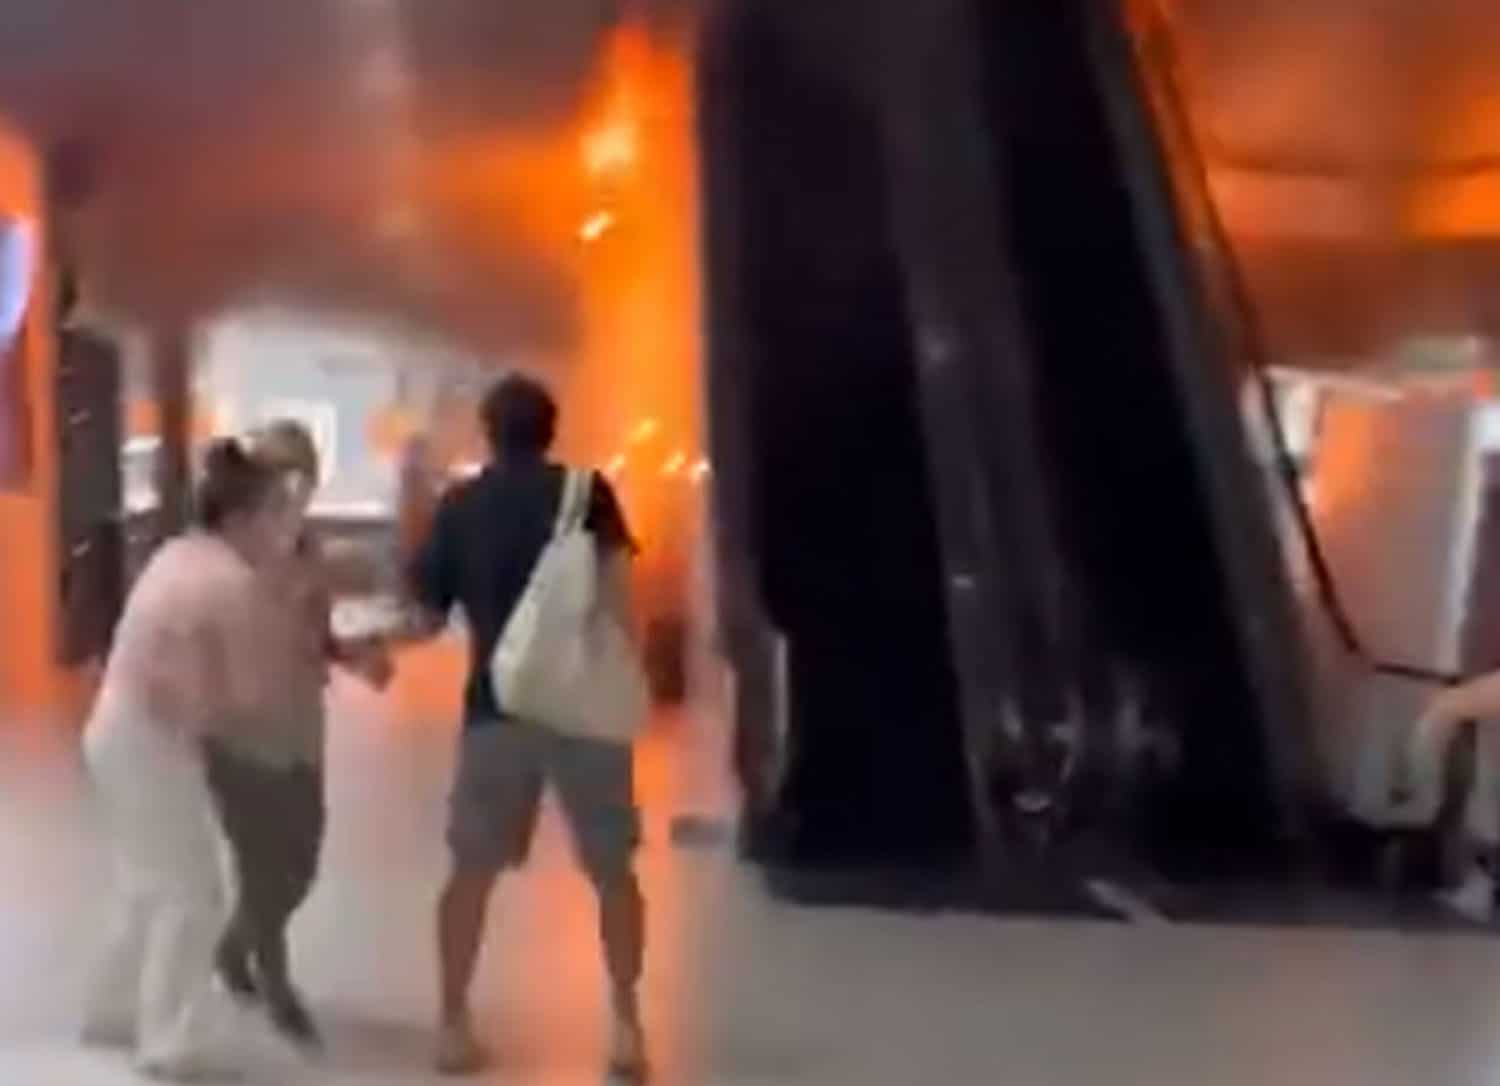 Christmas Tree Lights Causes Fire at CentralWorld